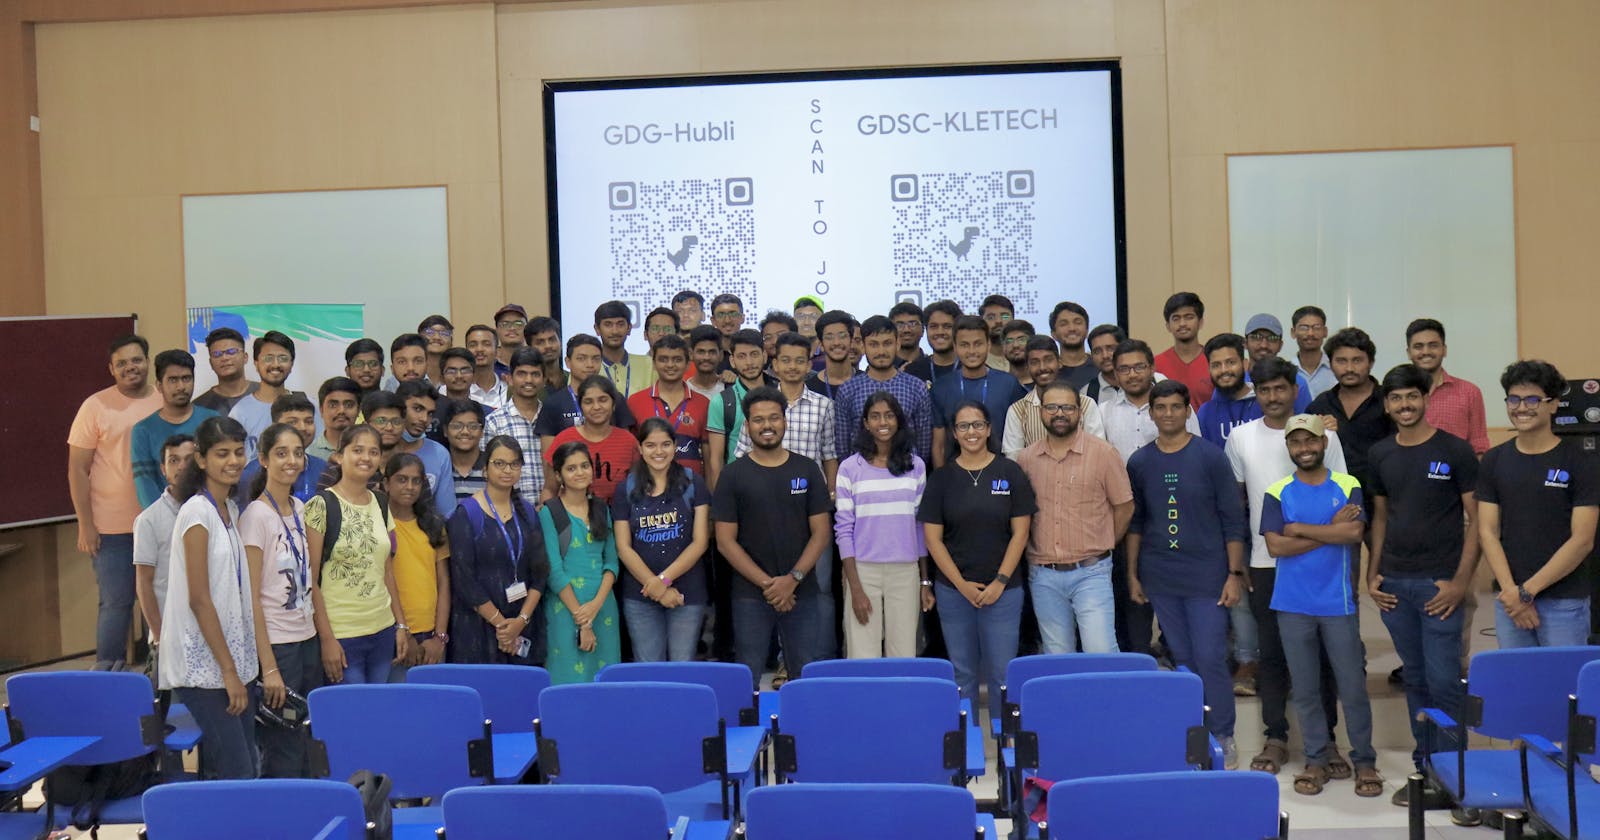 My Experience Speaking at Google I/O Extended Hubli 2022